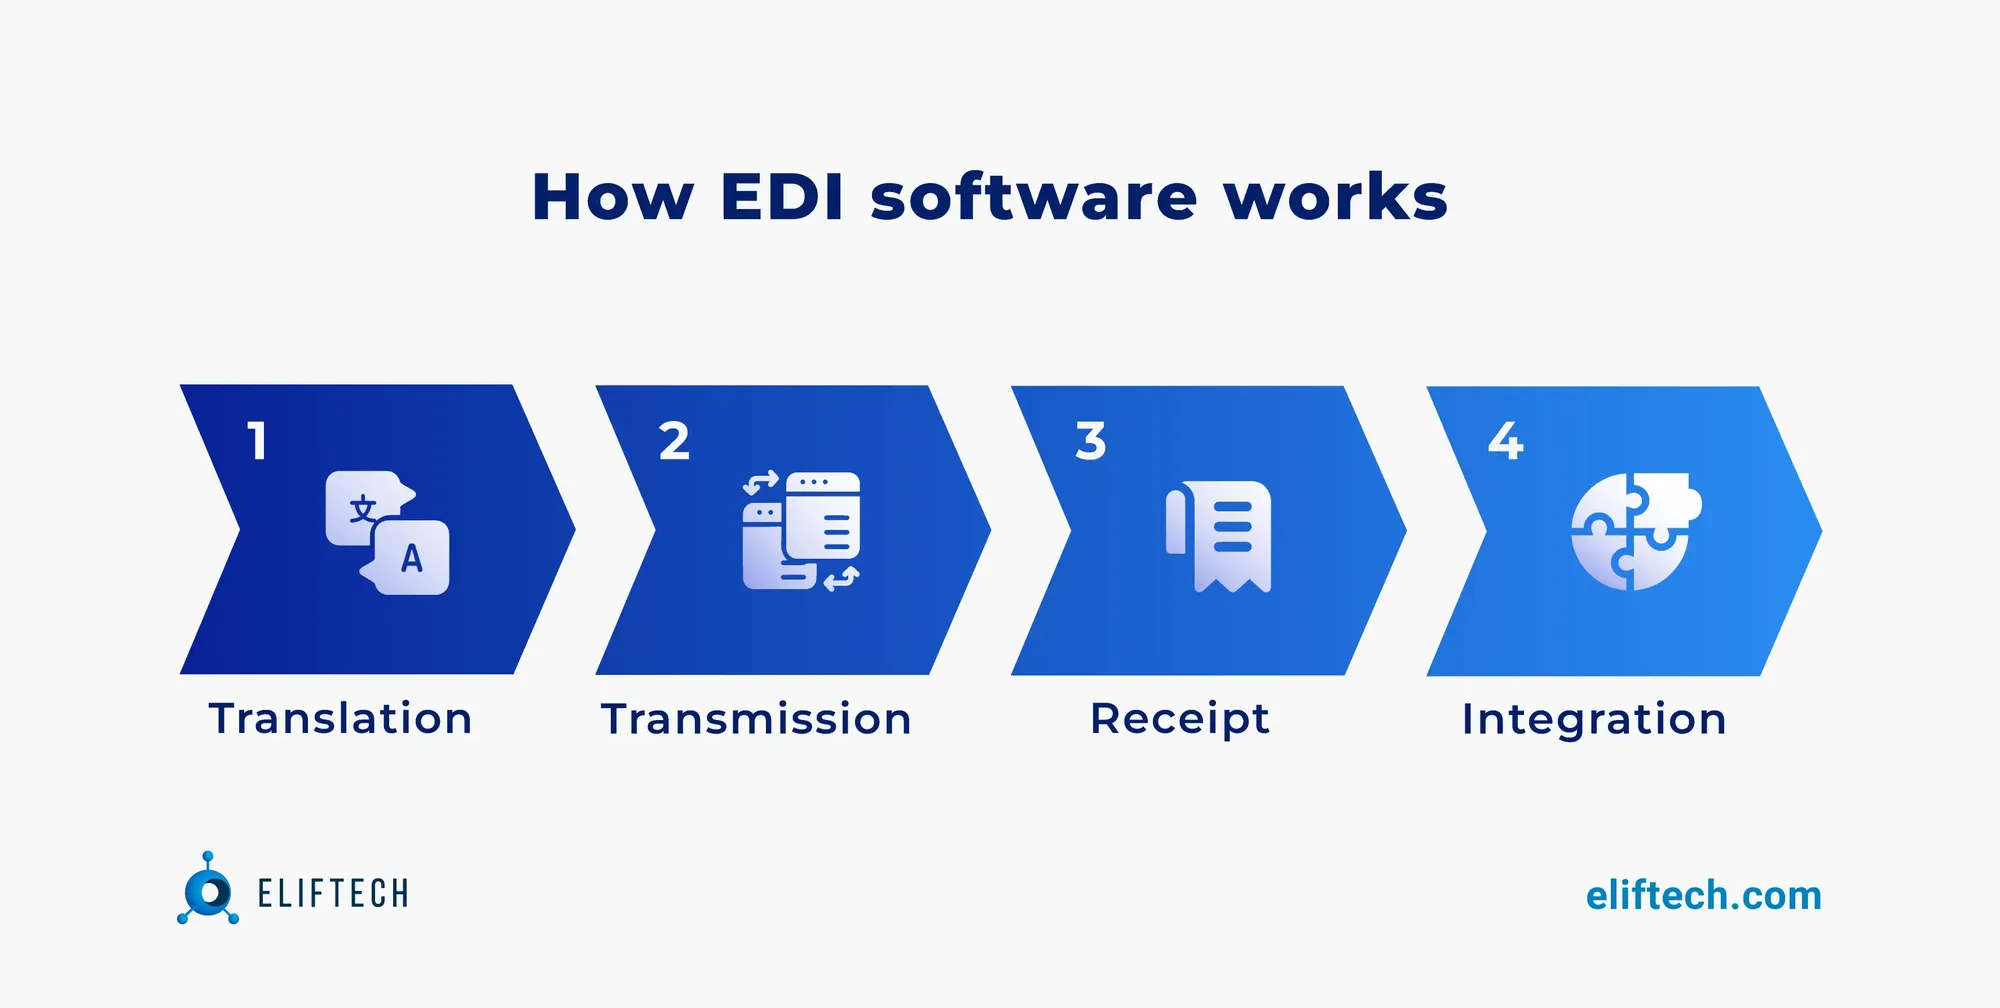 How EDI software works